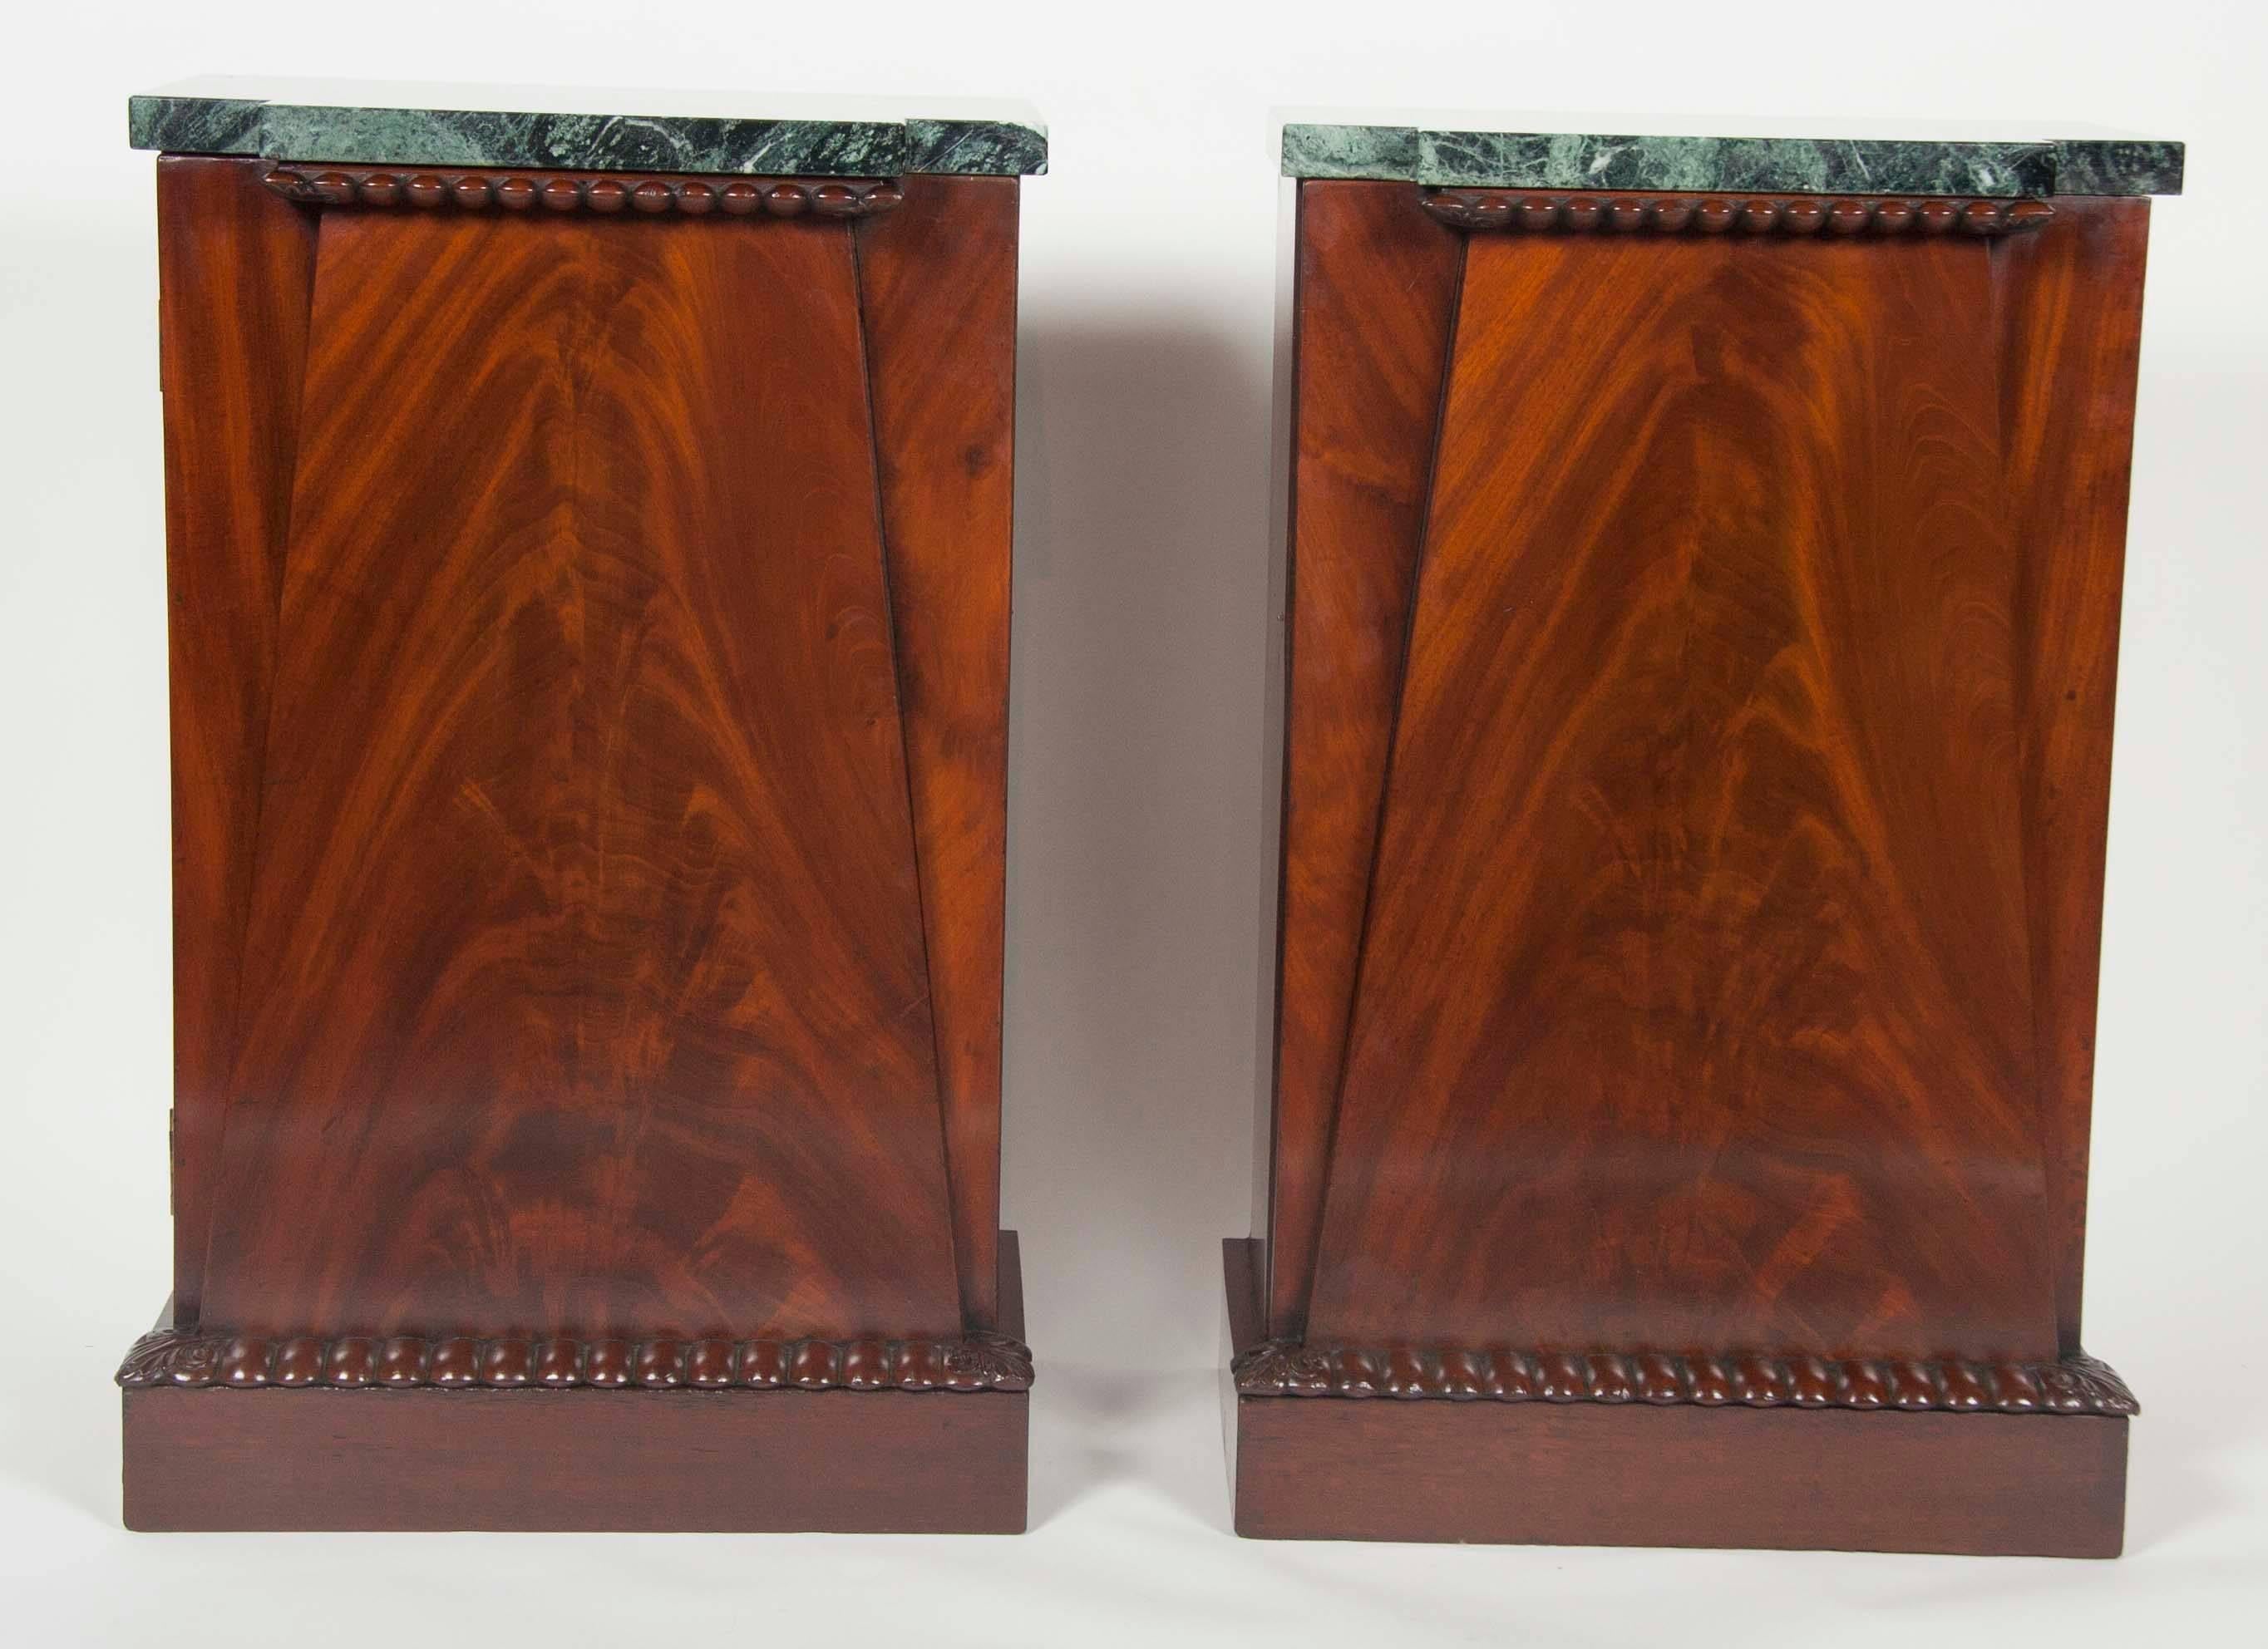 An unusual pair of American Empire mahogany veneer diminutive side cabinets with later marble tops. Doors open in opposing direction suitable for night tables.